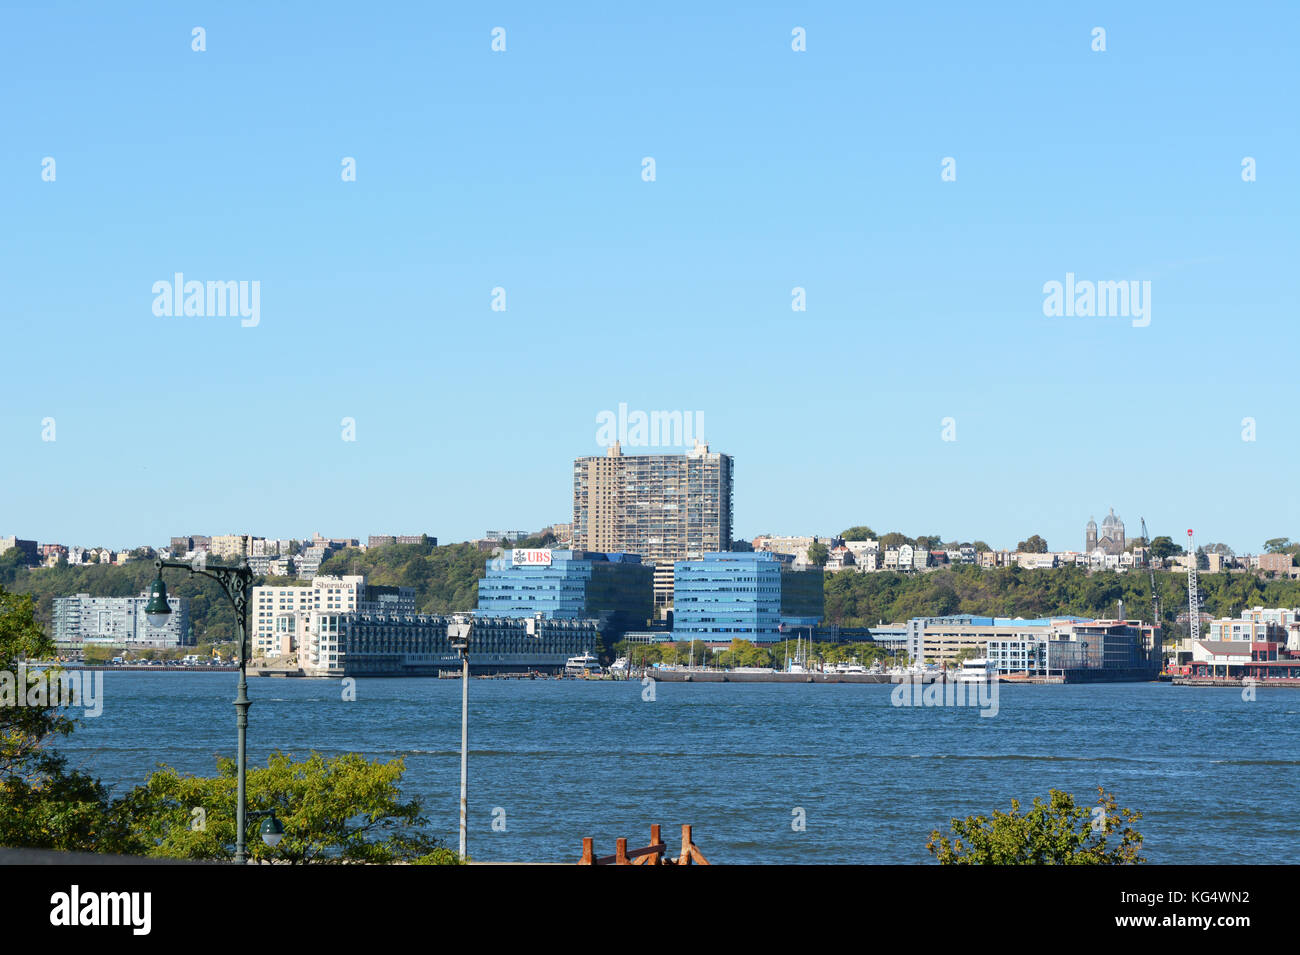 NEW YORK - OCTOBER 20, 2017: View across the Hudson River to New Jersey, where the Sheraton Hotel and UBS Financial Services stand at Weehawken Cove a Stock Photo